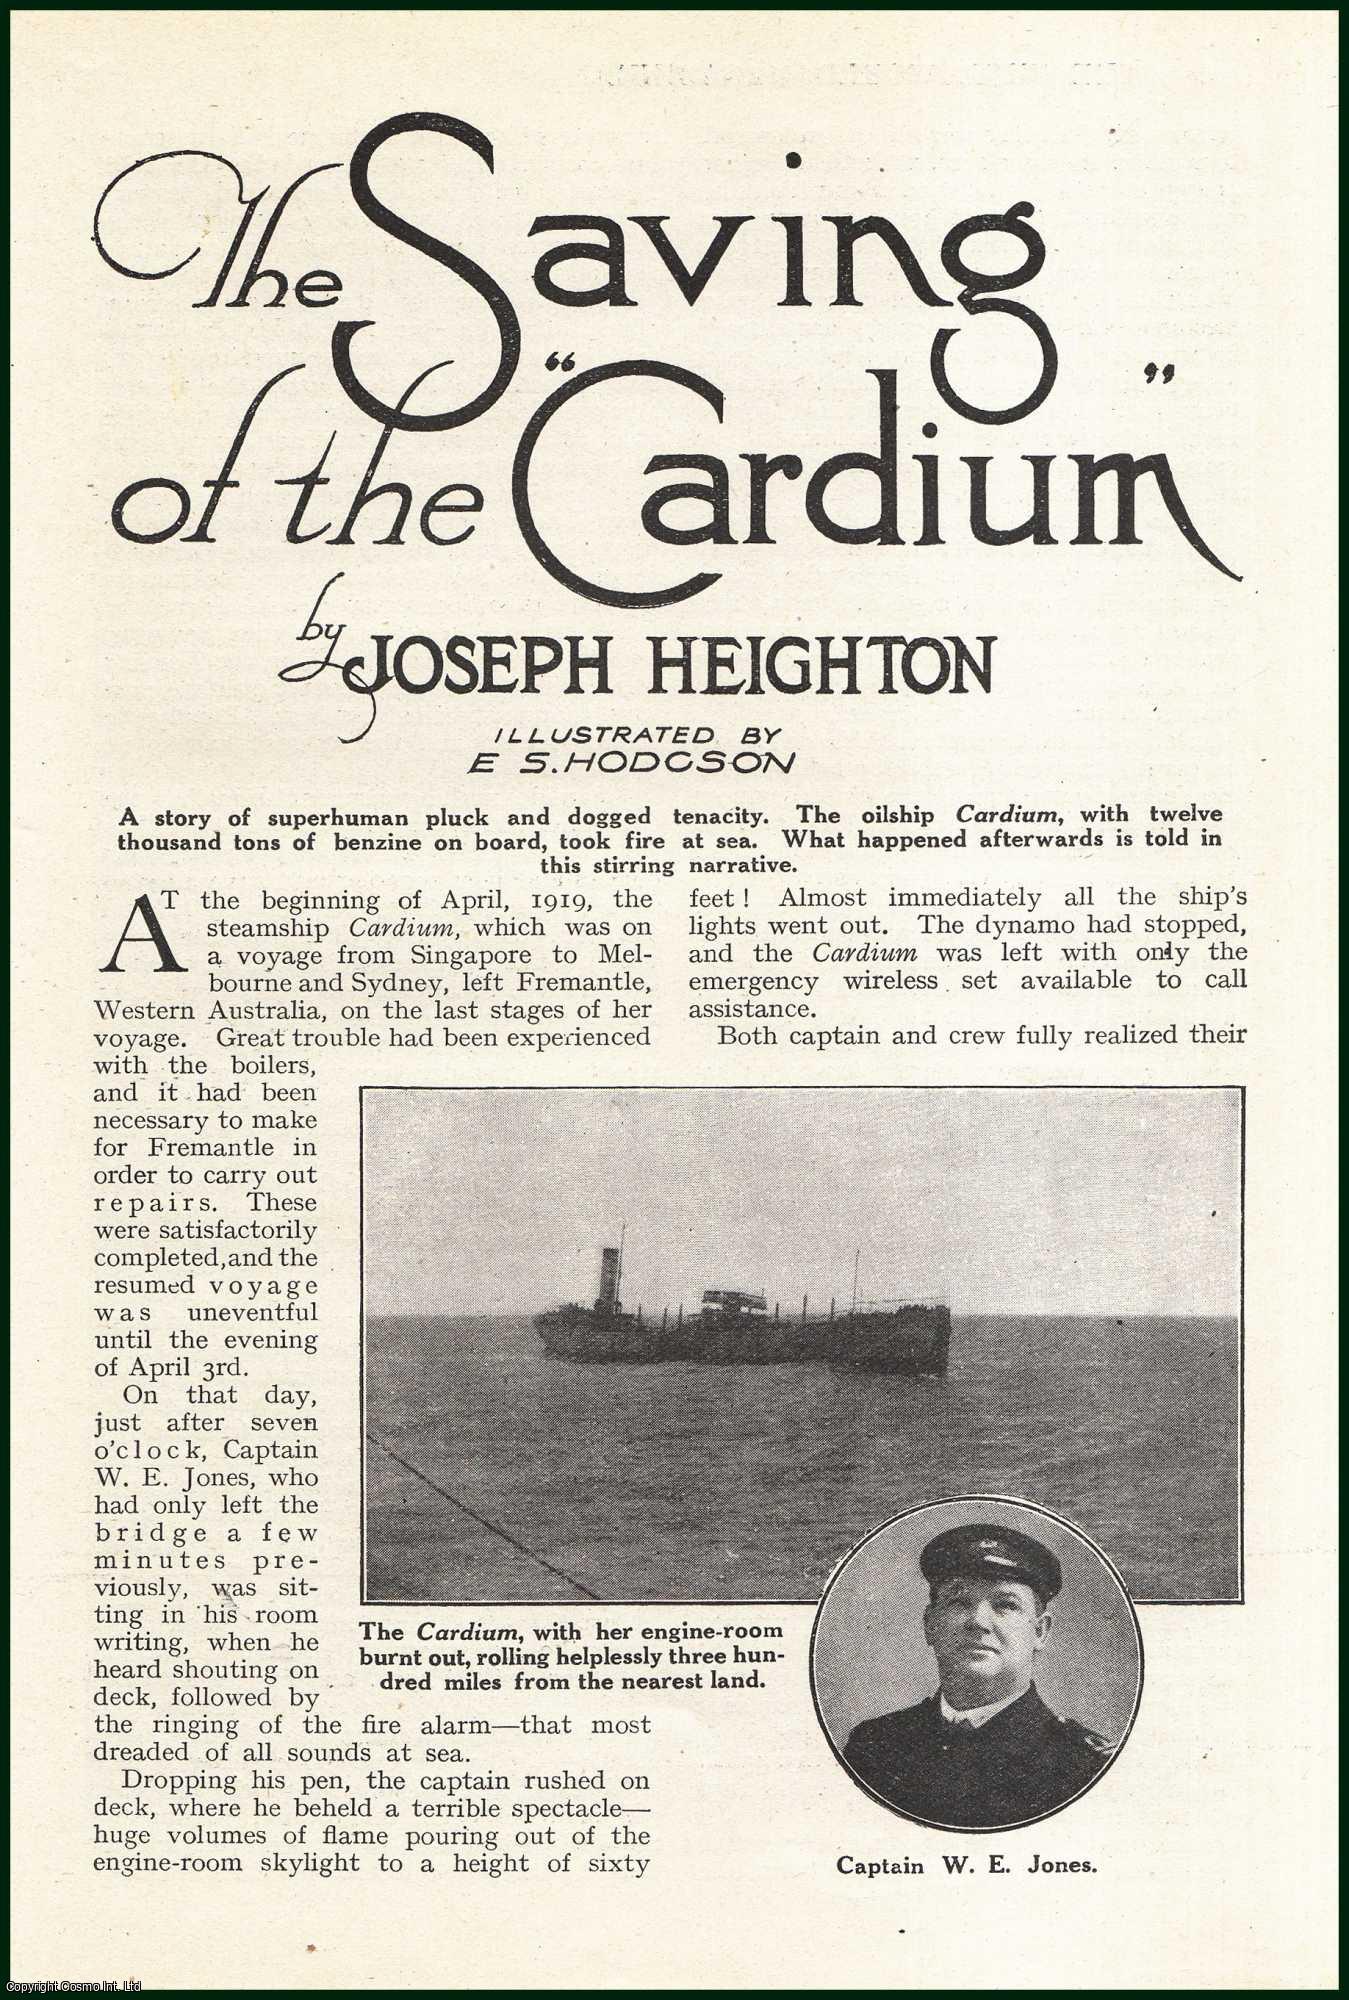 Joseph Heighton, illustrated by E.S. Hodcson - The Saving of The Cardium : a story of superhuman pluck & dogged tenacity. The oilship Cardium, with twelve thousand tons of benzine on board, took fire at sea & what happened afterwards is told in this stirring narrative. This is an uncommon original article from the Wide World Magazine, 1921.